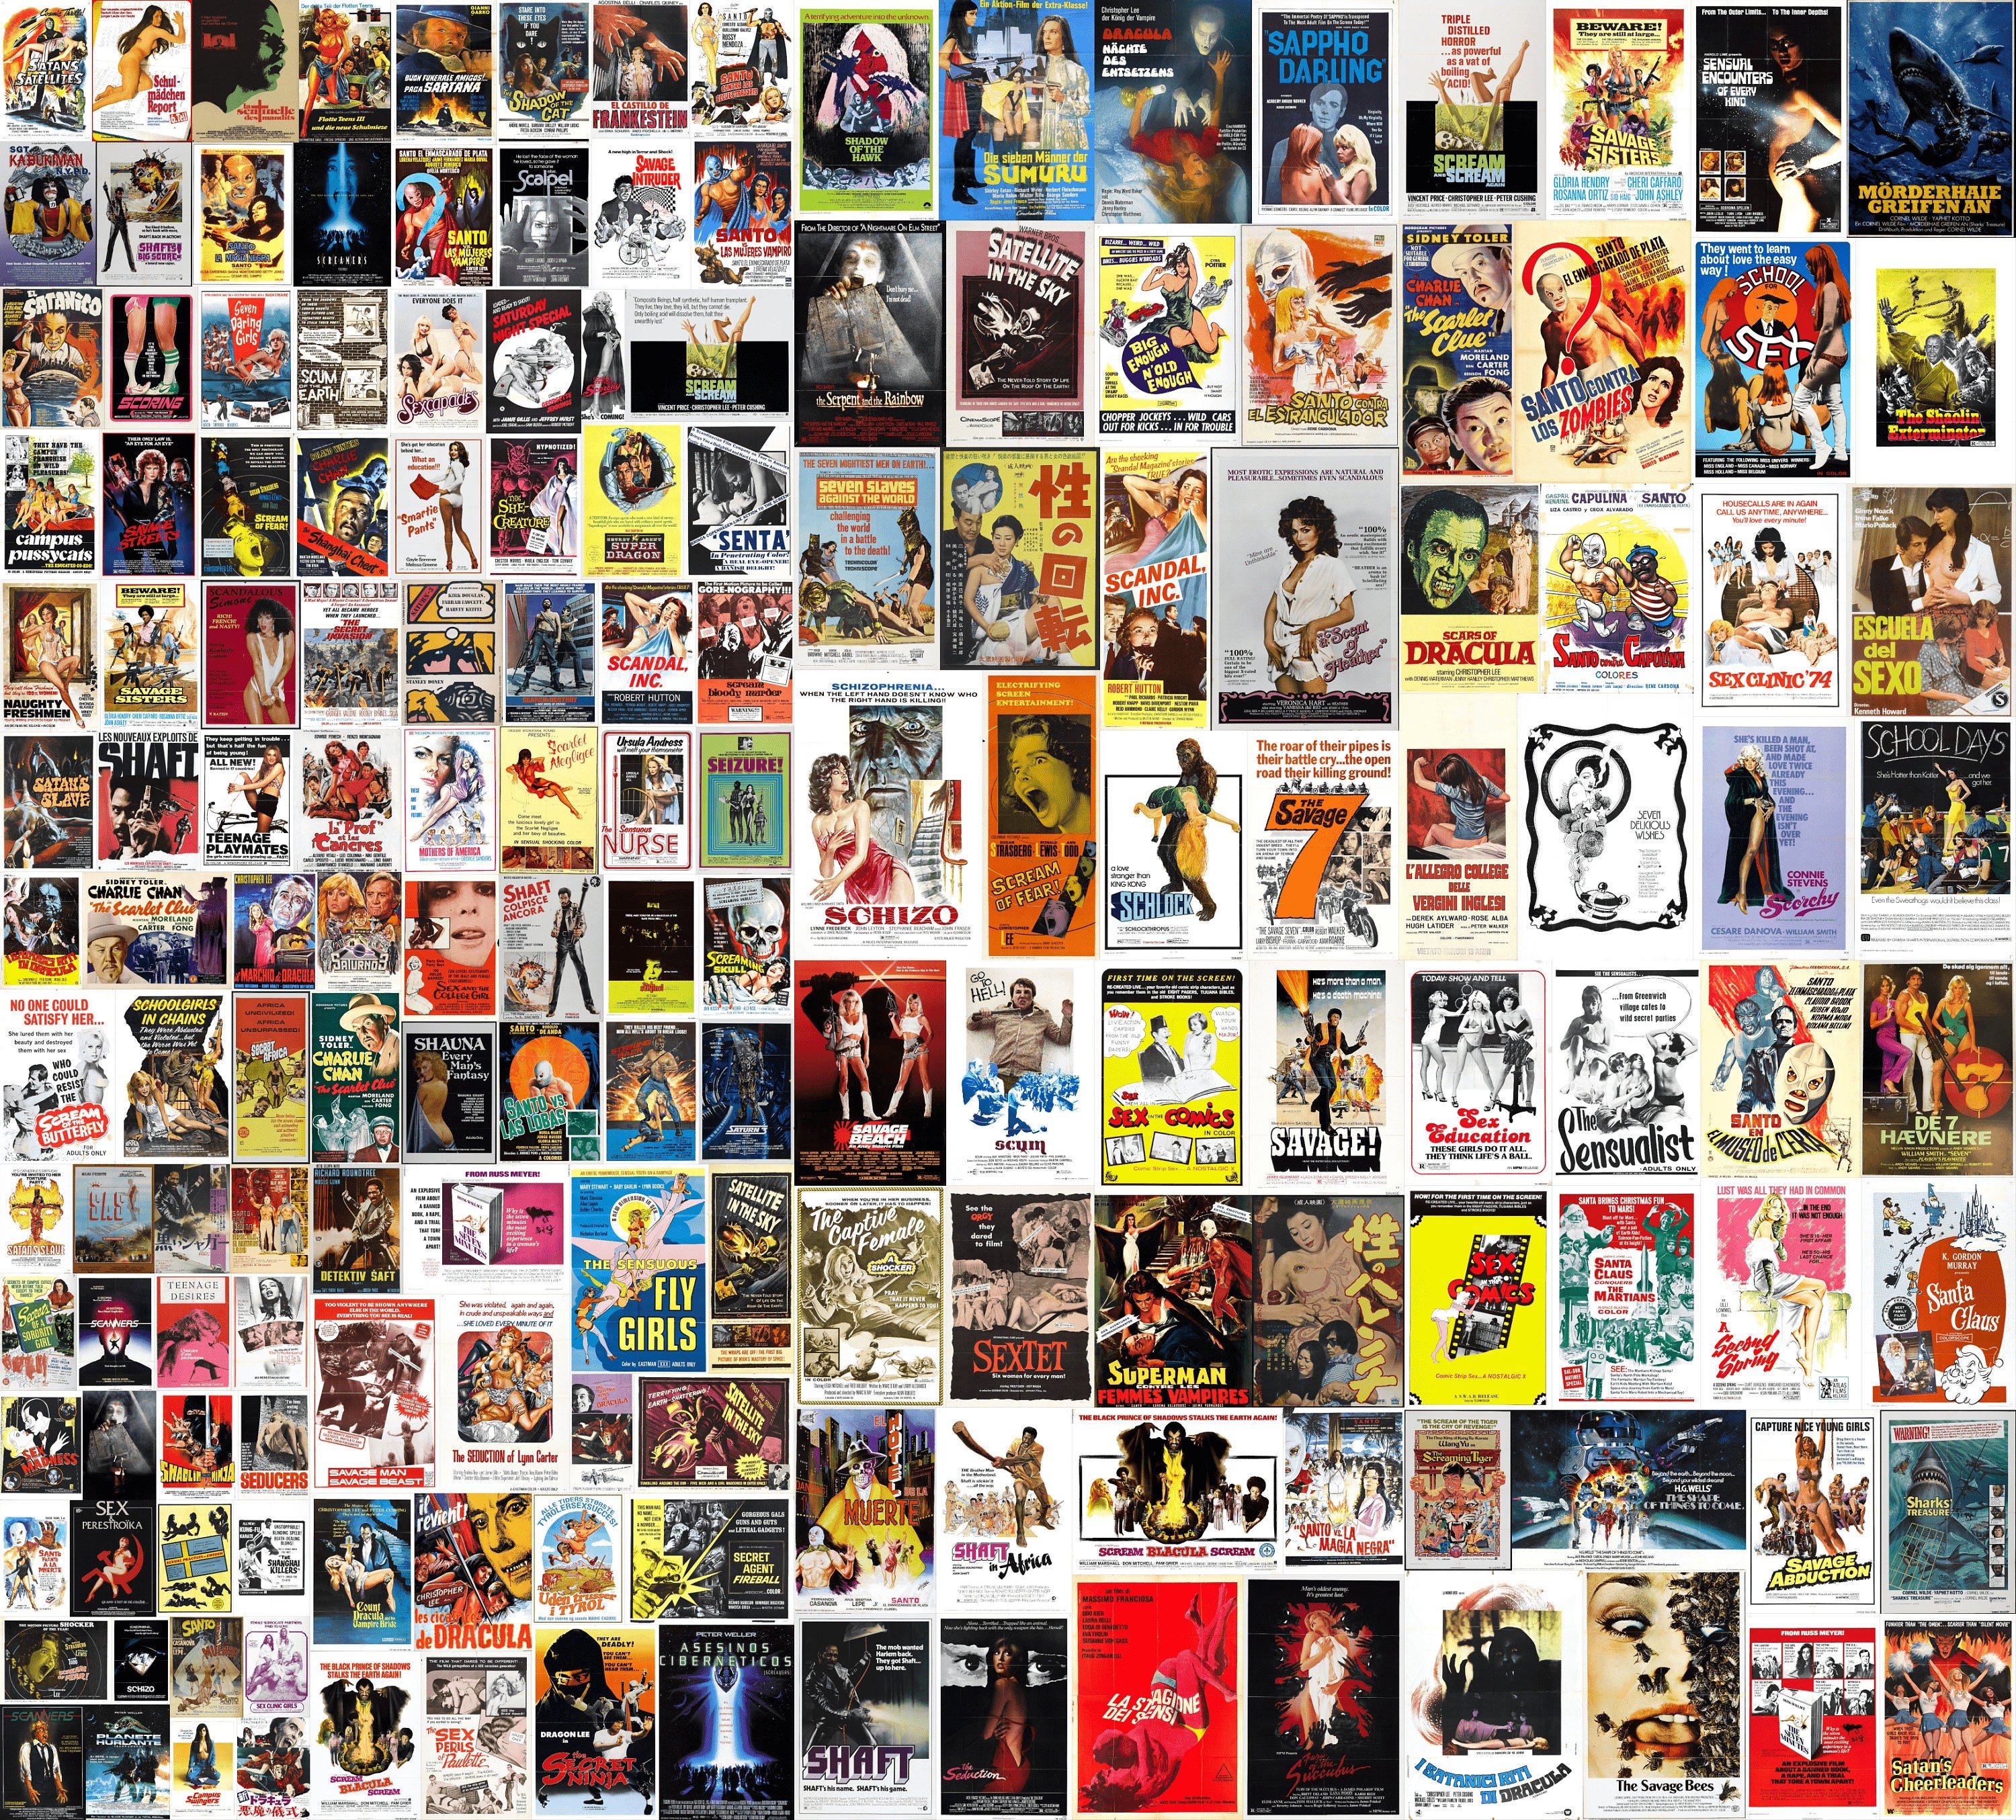 5500+ Vintage Retro DIGITAL Movie Poster Collection - JPG format, Rocky Horror Style, B Movie Cinema Posters for Vibrant Adult Scrapbooking